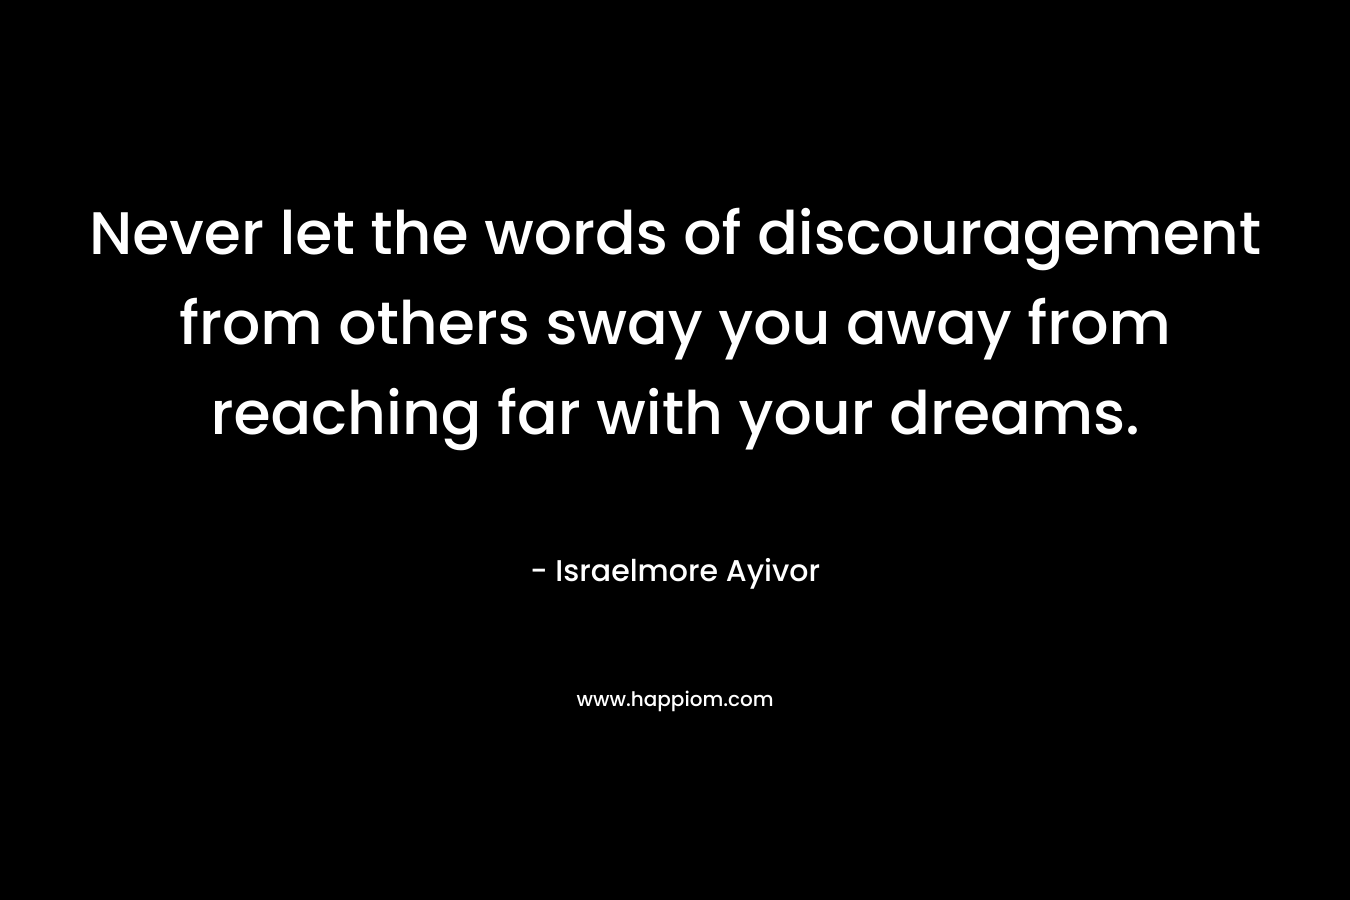 Never let the words of discouragement from others sway you away from reaching far with your dreams. – Israelmore Ayivor